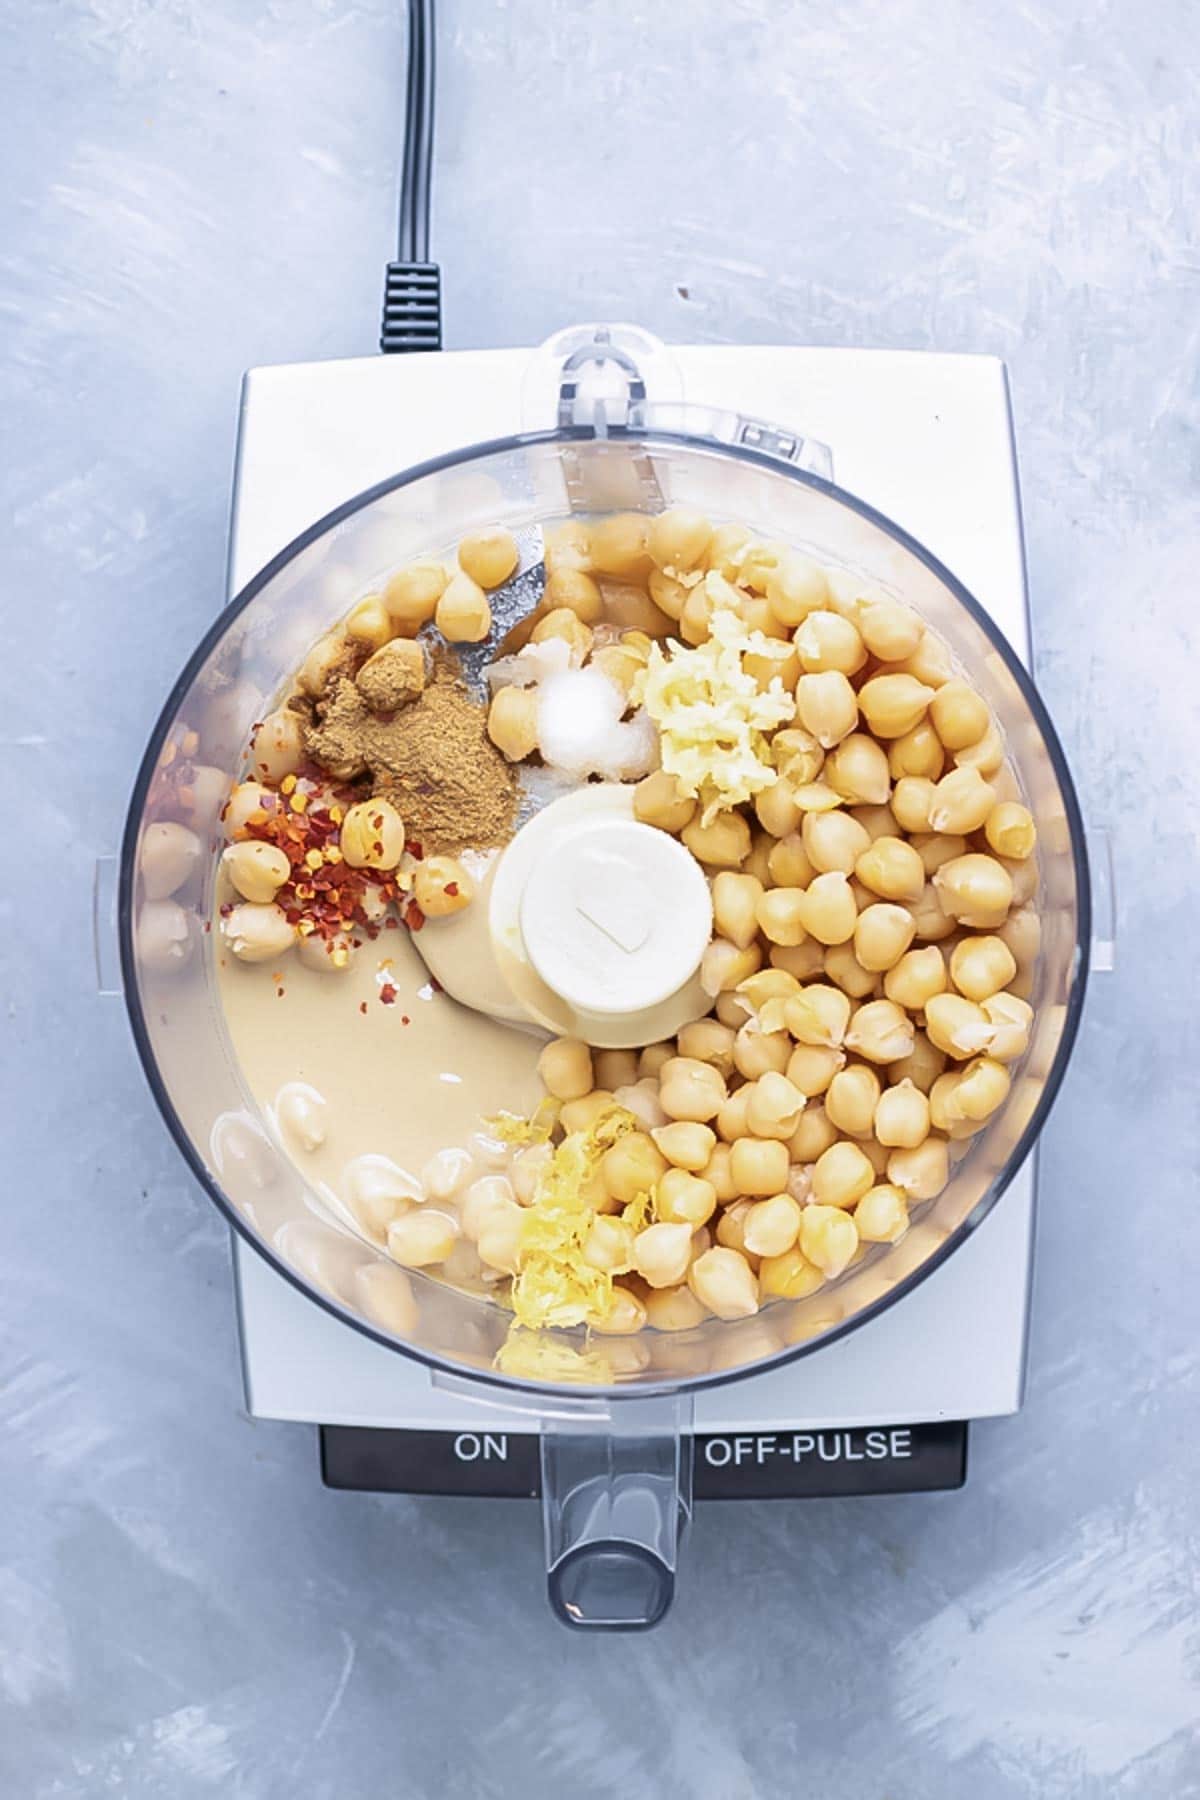 The ingredients for hummus are combined in a food processor.